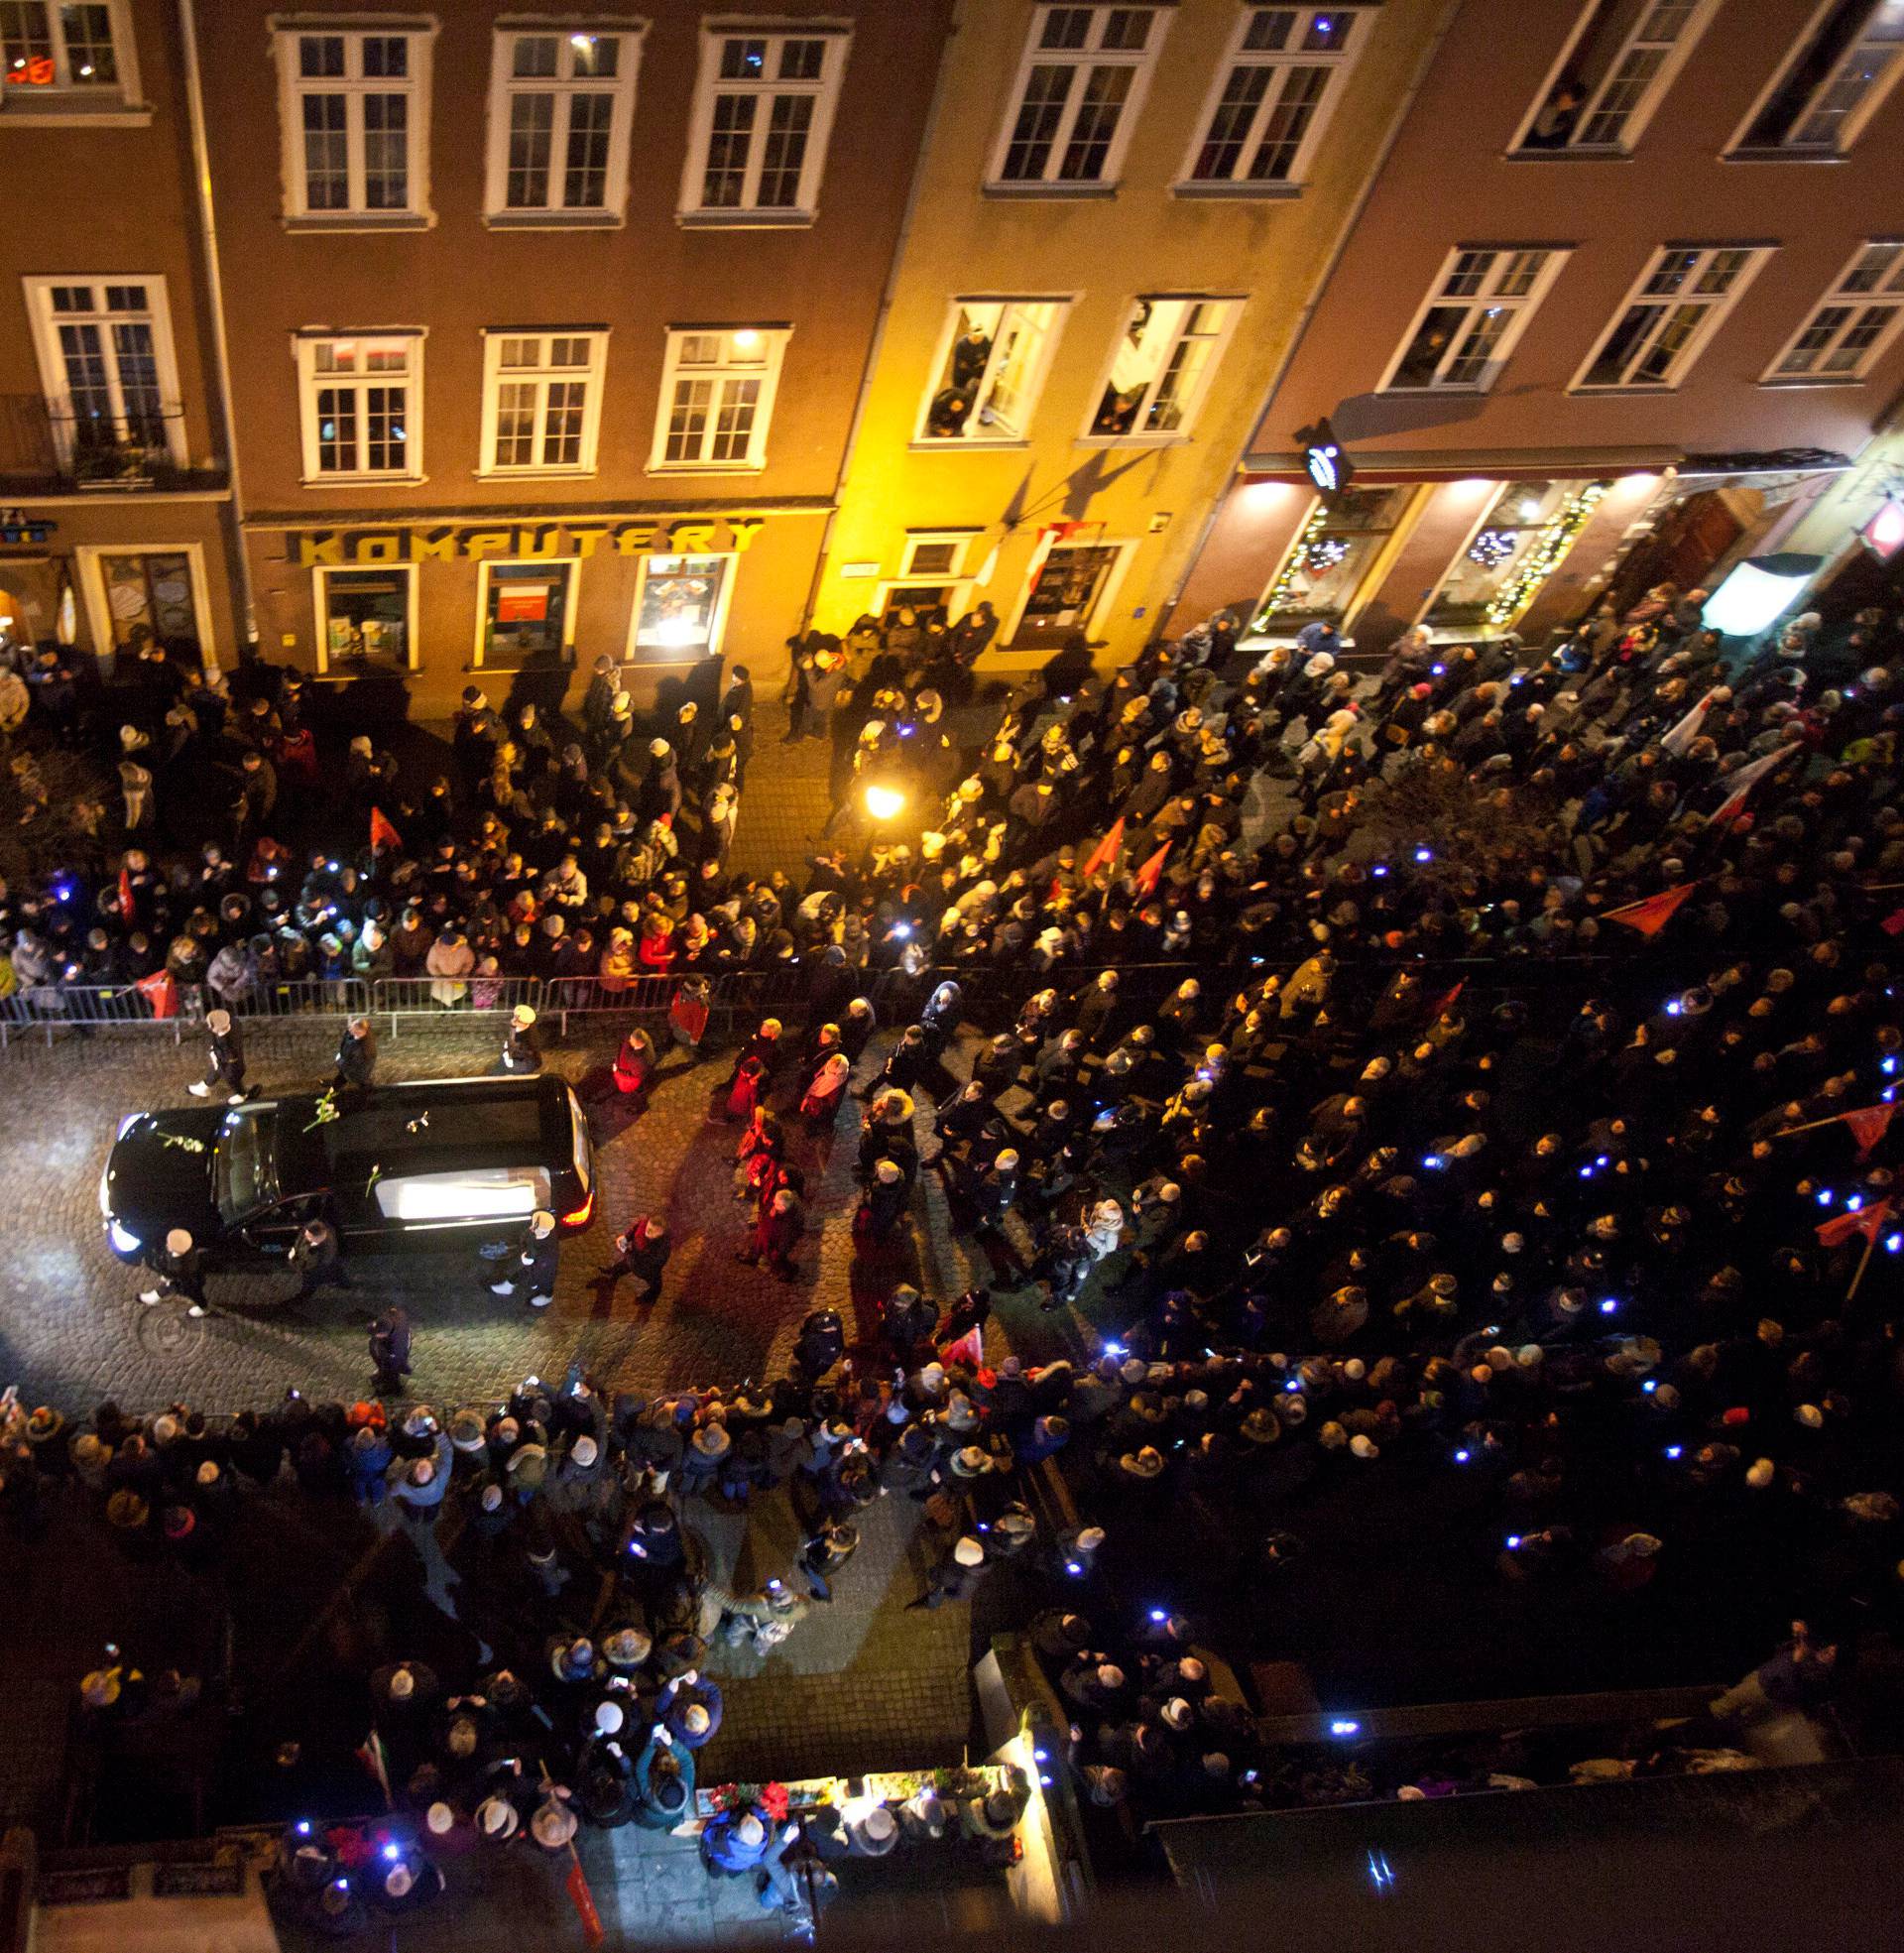 People take part in a procession following the coffin of Pawel Adamowicz, Gdansk mayor who died after being stabbed at charity event, in Gdansk